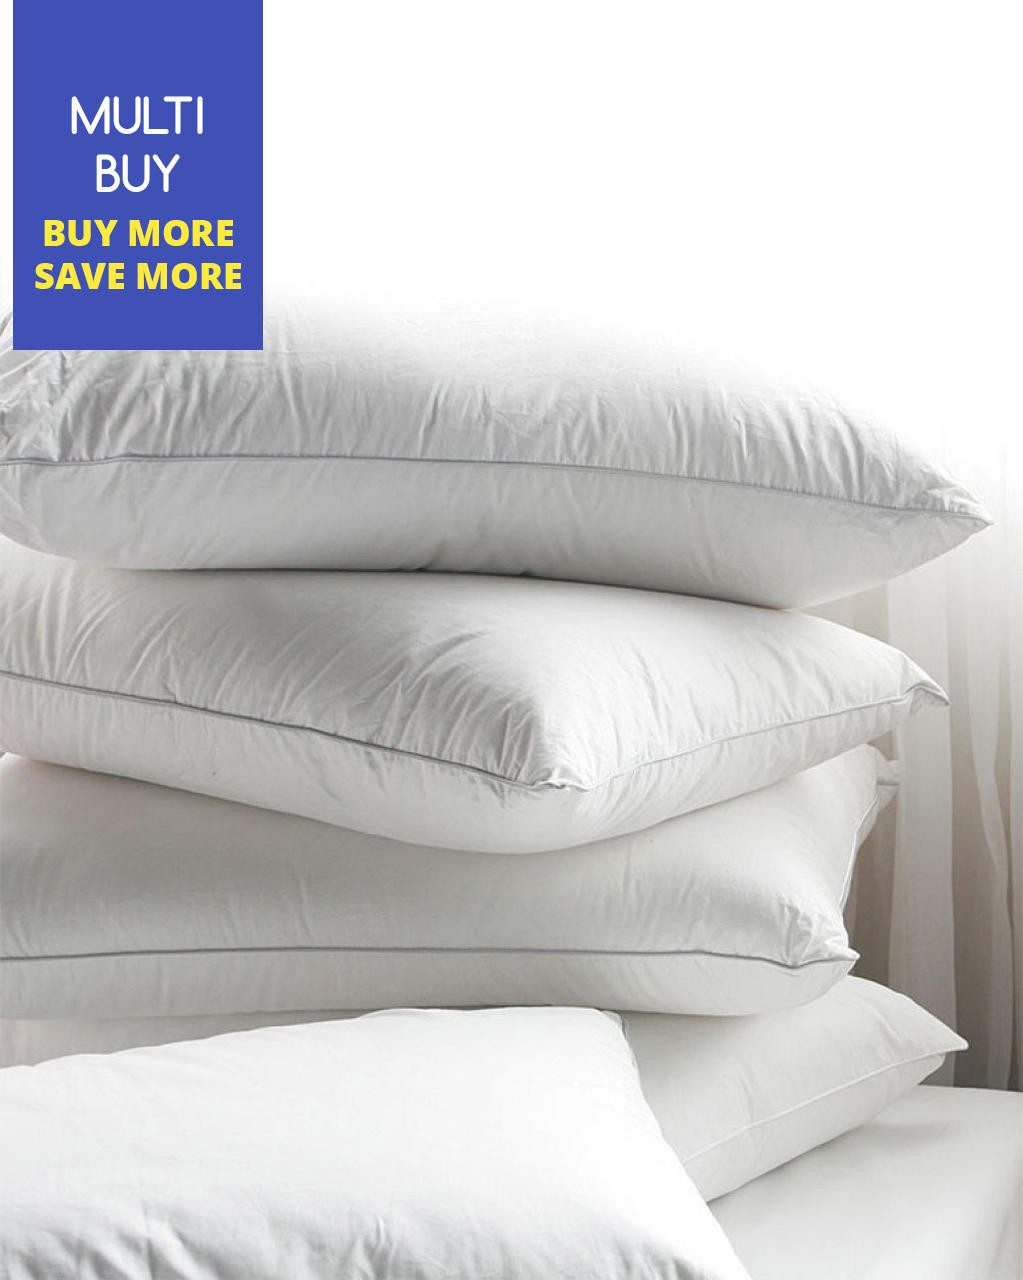 Bounce Back Pillows Soft Hollowfibre Polycotton Cover Rectangle Bed Pillow Pair 